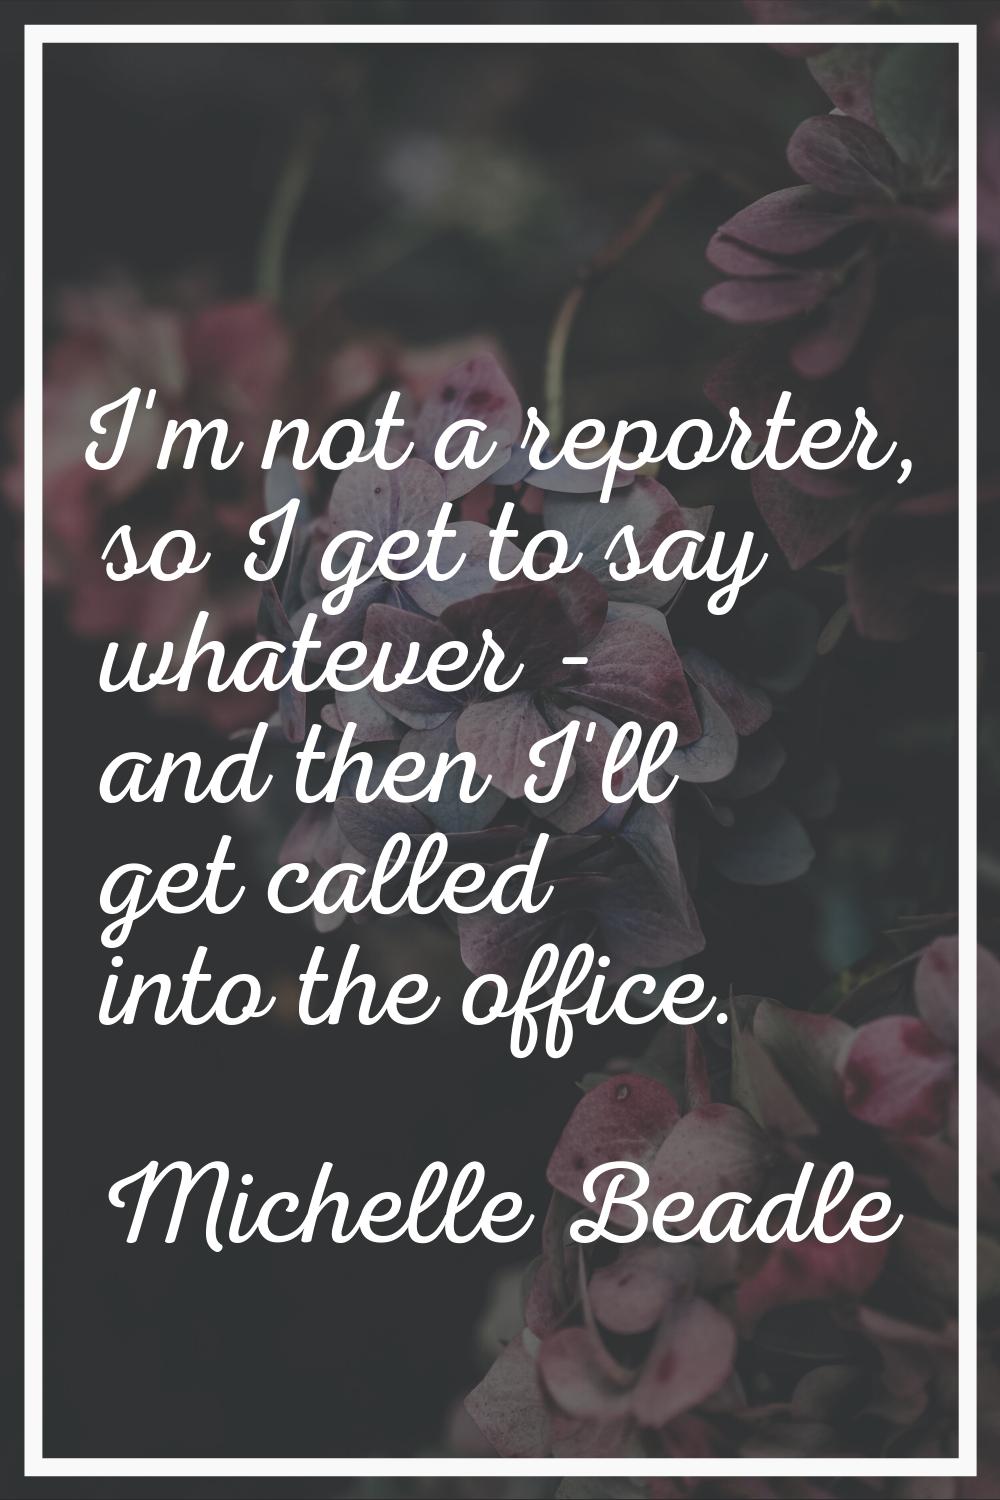 I'm not a reporter, so I get to say whatever - and then I'll get called into the office.